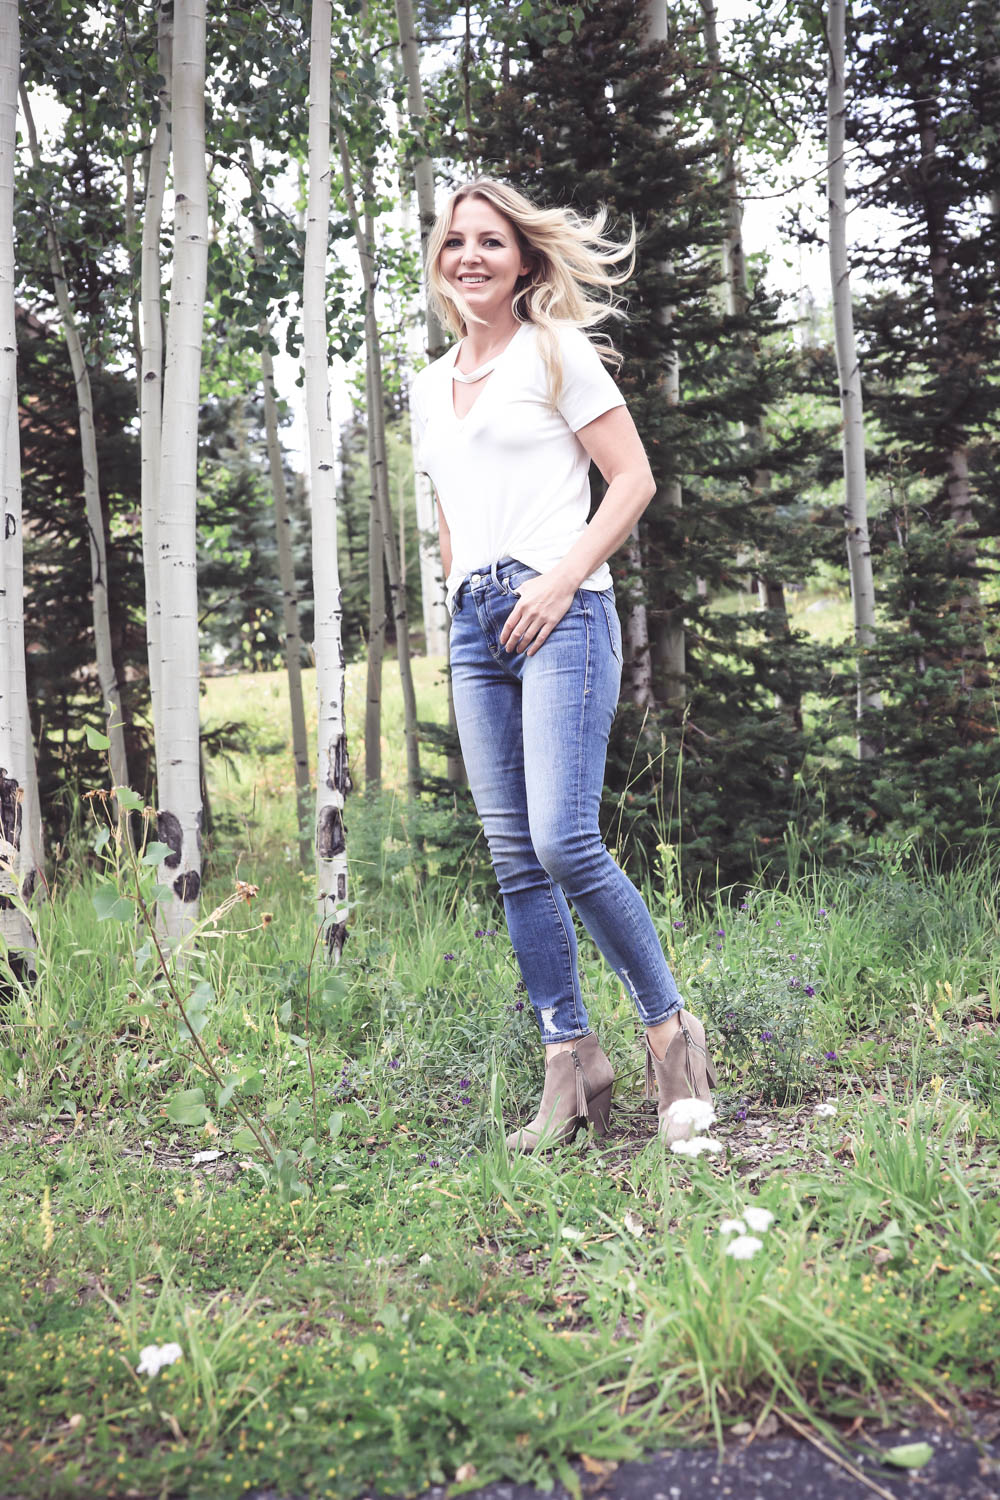 Ankle Boots, How to wear skinny jeans with ankle boots, try cropped jeans, by fashion blogger over 40, Erin busbee, Telluride, Colorado